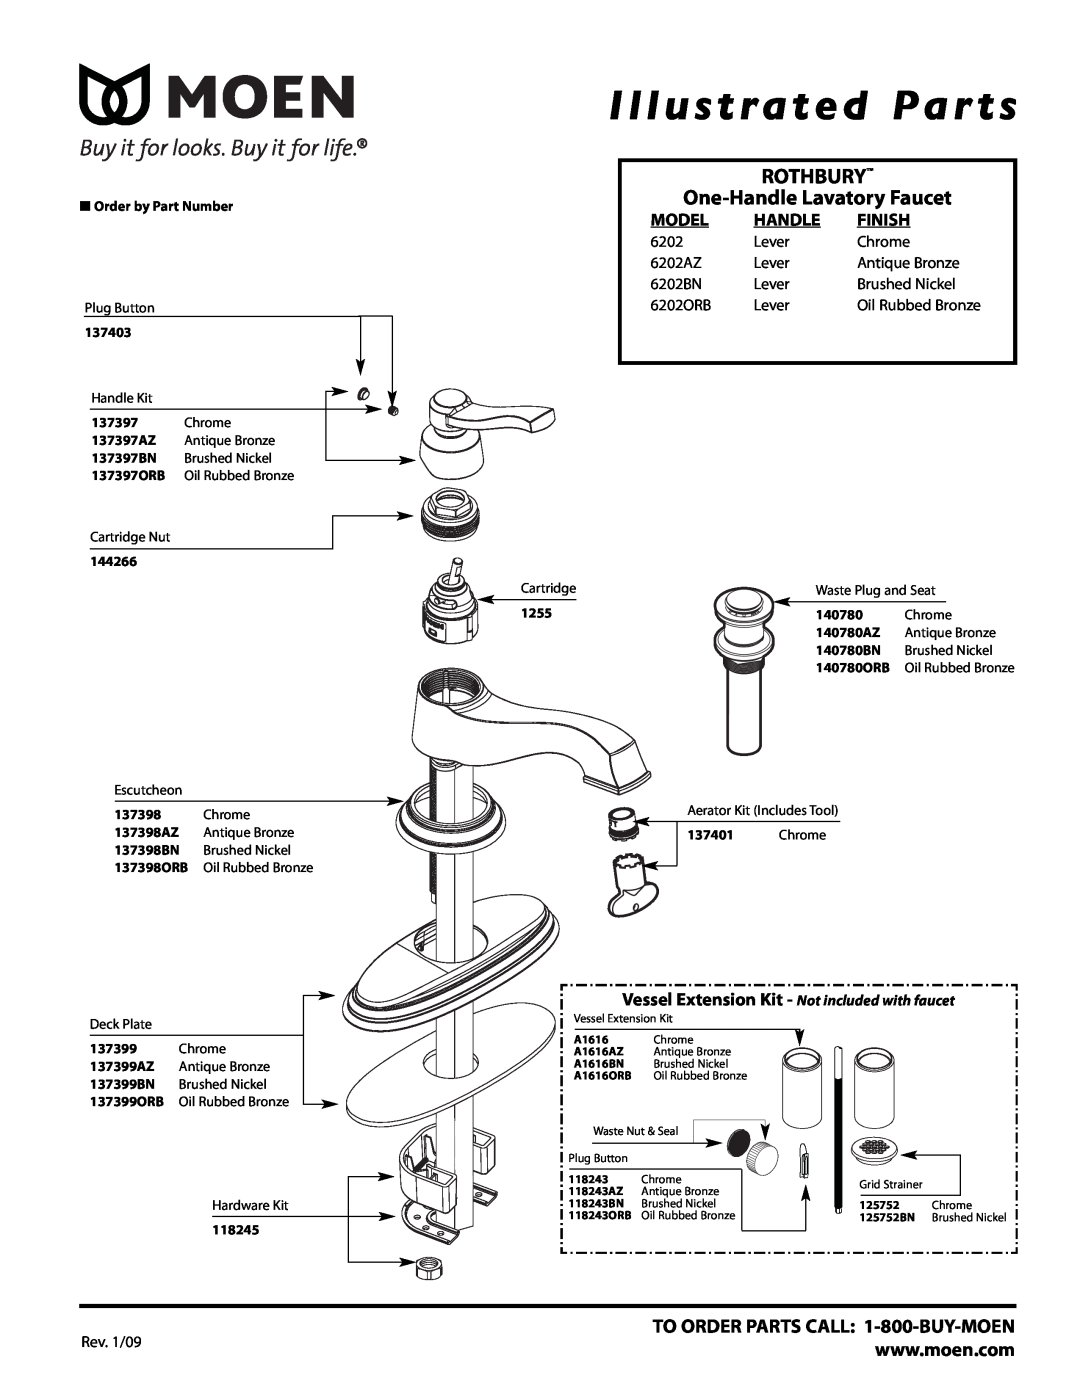 Moen 6202ORB manual Illustrated Par ts, ROTHBURY One-Handle Lavatory Faucet, TO ORDER PARTS CALL 1-800-BUY-MOEN, Model 